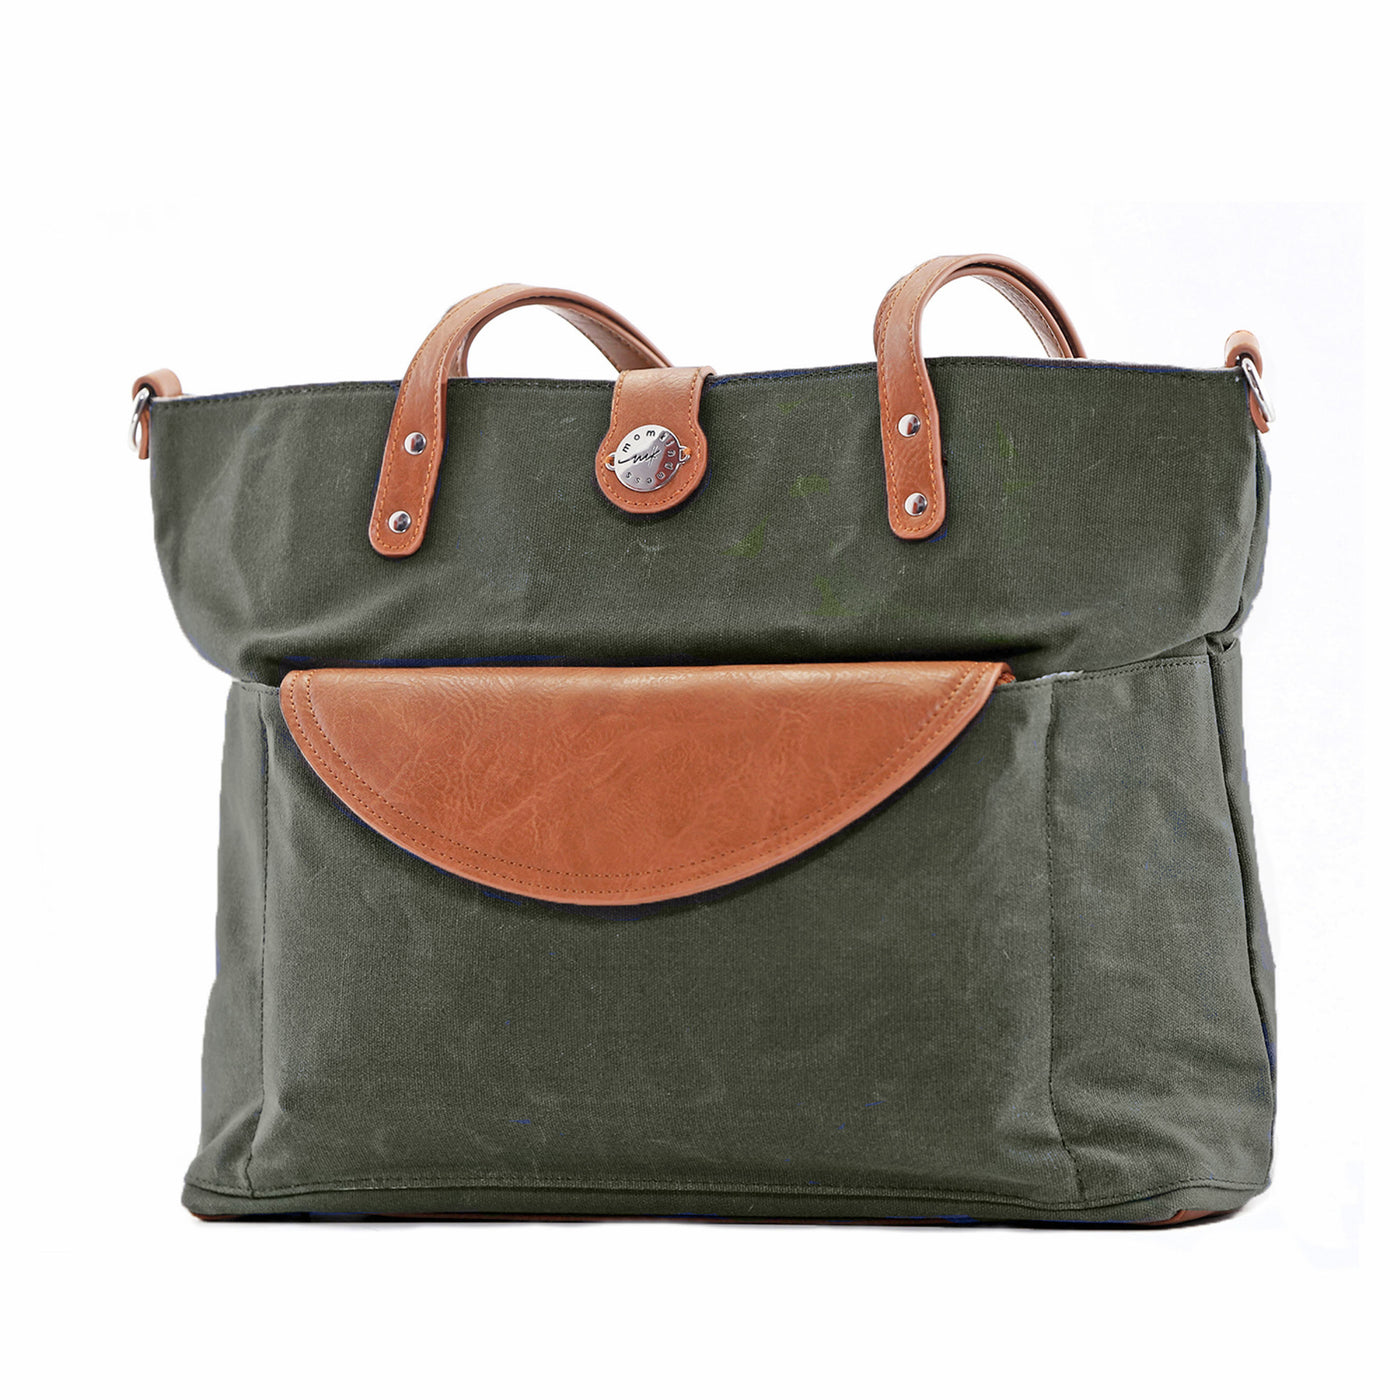 Forest green waxed canvas tote with brown vegan leather accents and clutch tucked in front pocket, shown on white background.